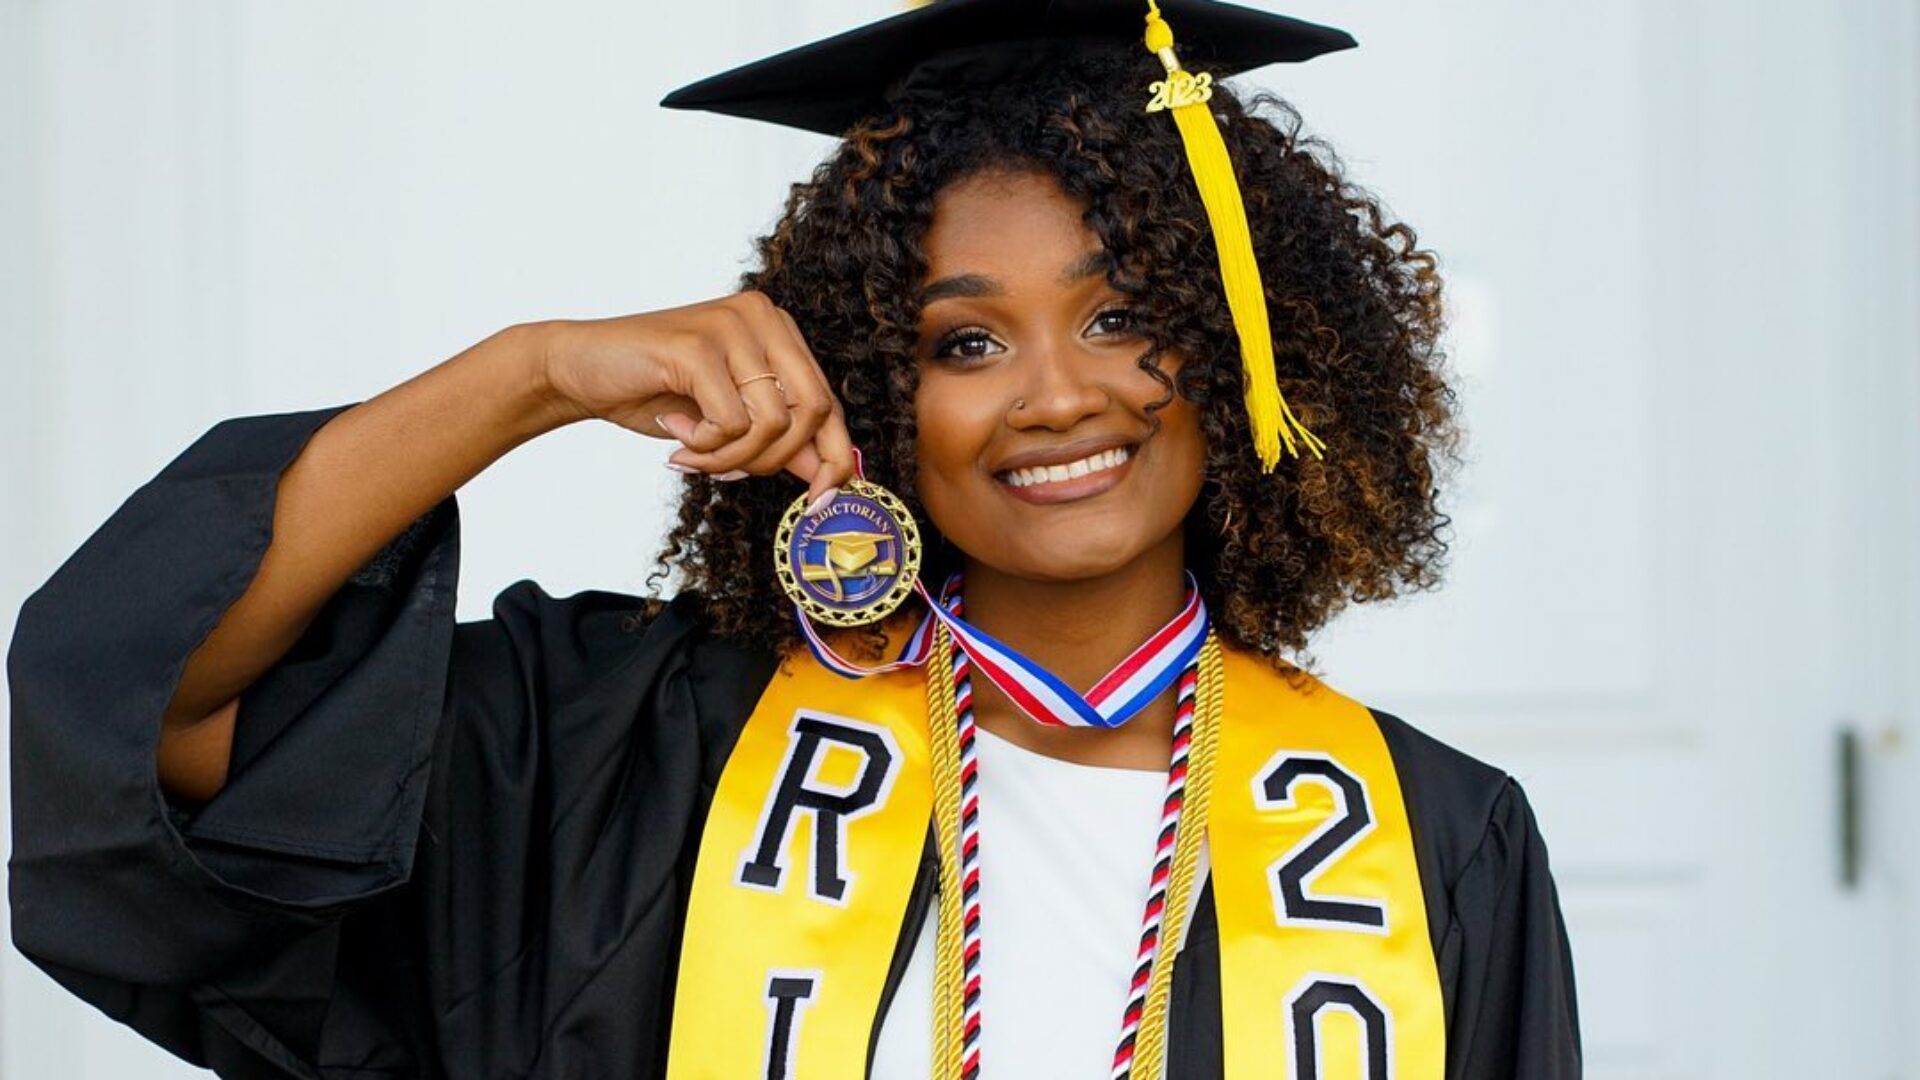 Alecia Washington makes history as the first Black valedictorian in the 100-year legacy of R.J. Reynolds High School.